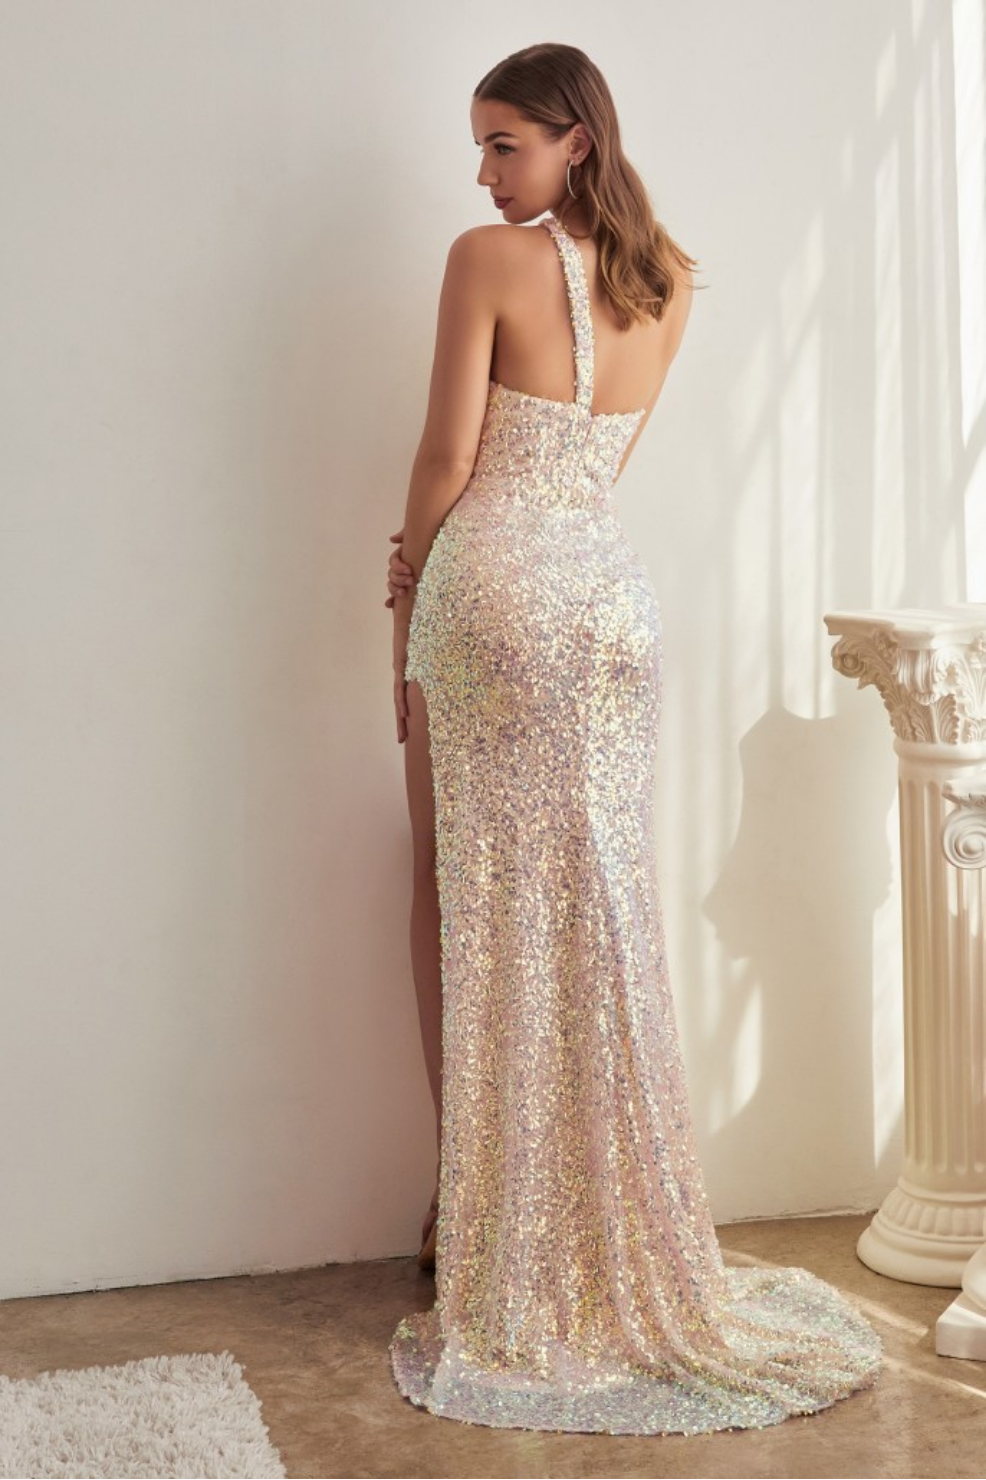 6 DIFFERENT COLOR OF ONE SOULDER FITTED SEQUIN GOWN